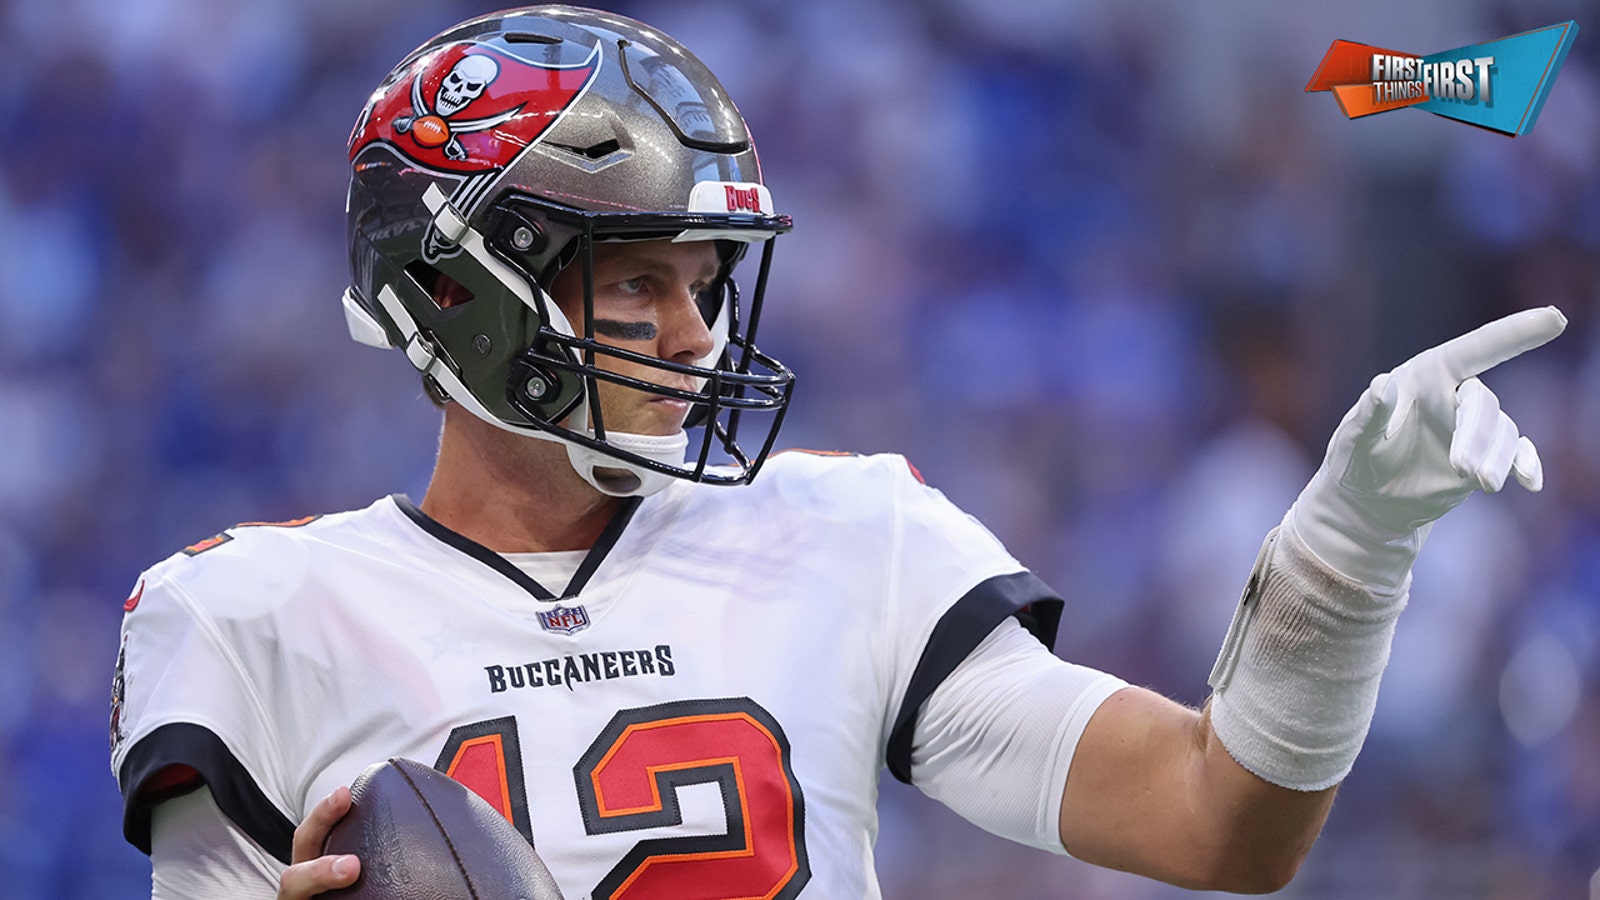 Brady embraces criticism of Buccaneers' O-line 